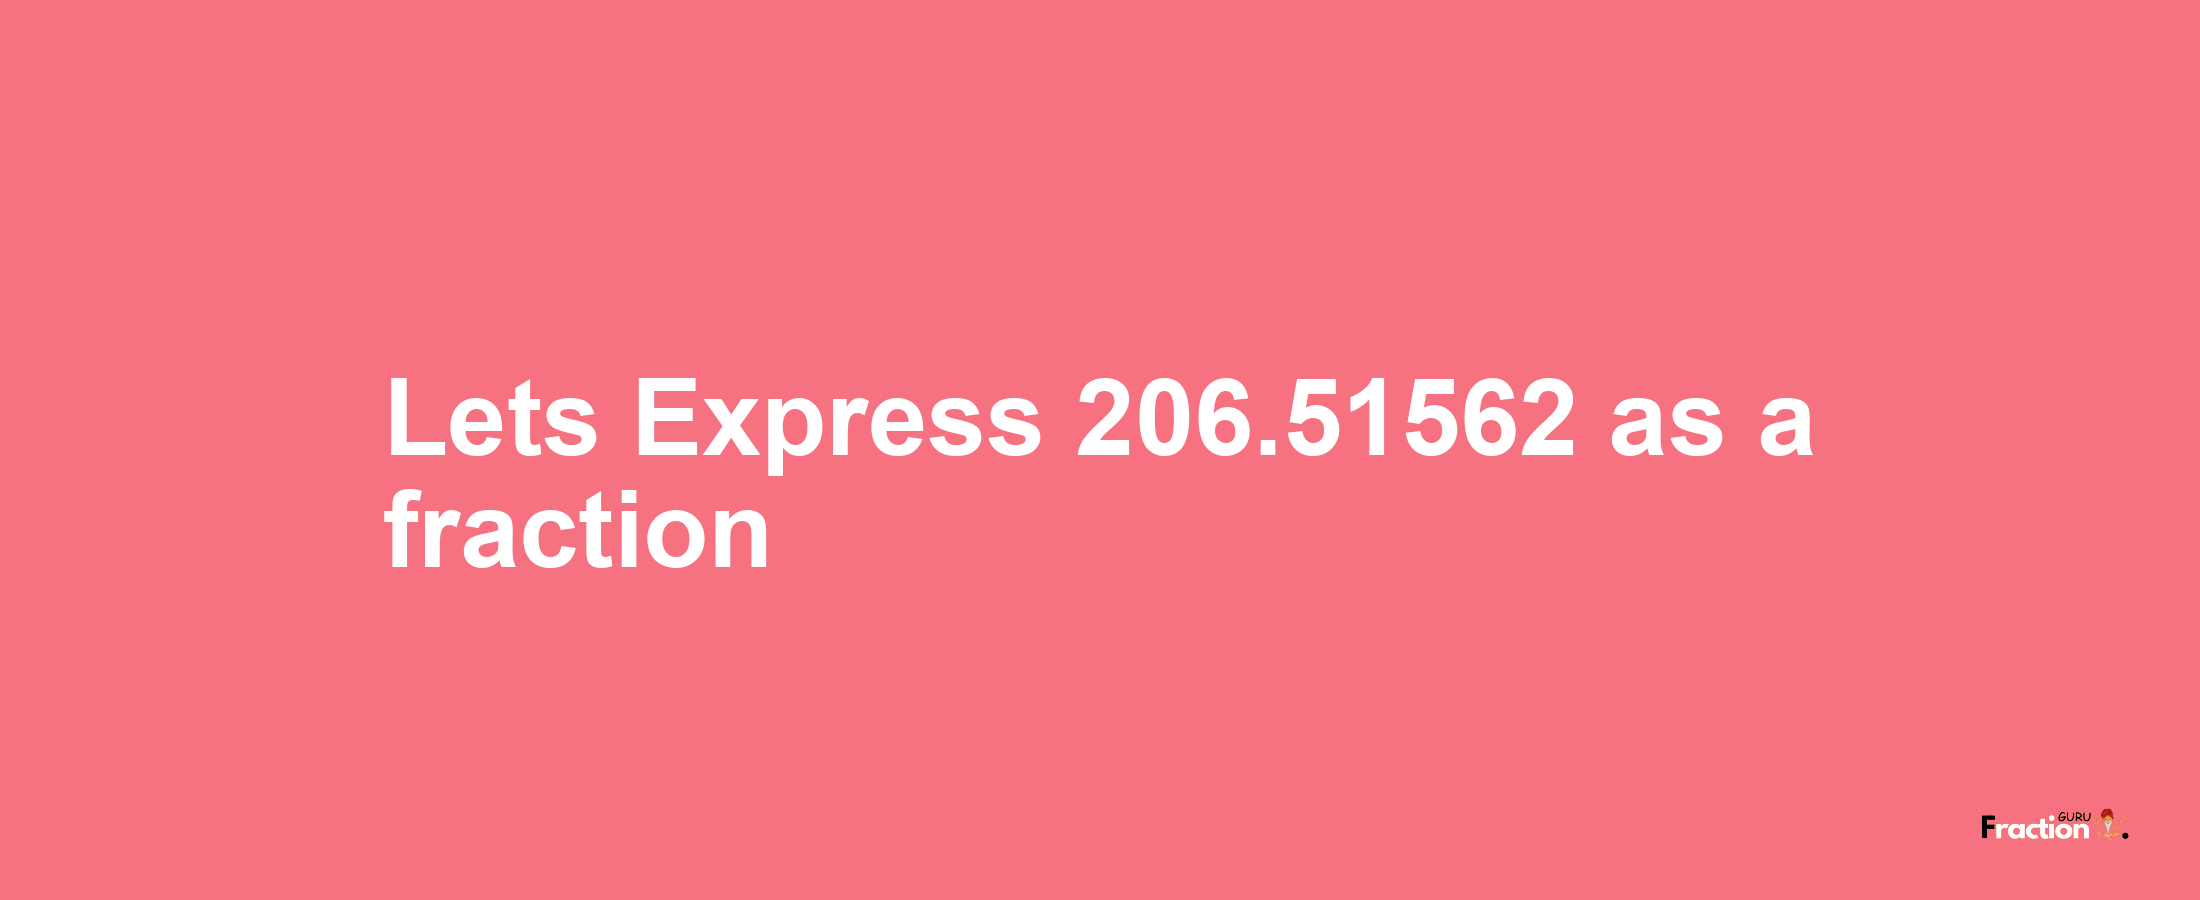 Lets Express 206.51562 as afraction